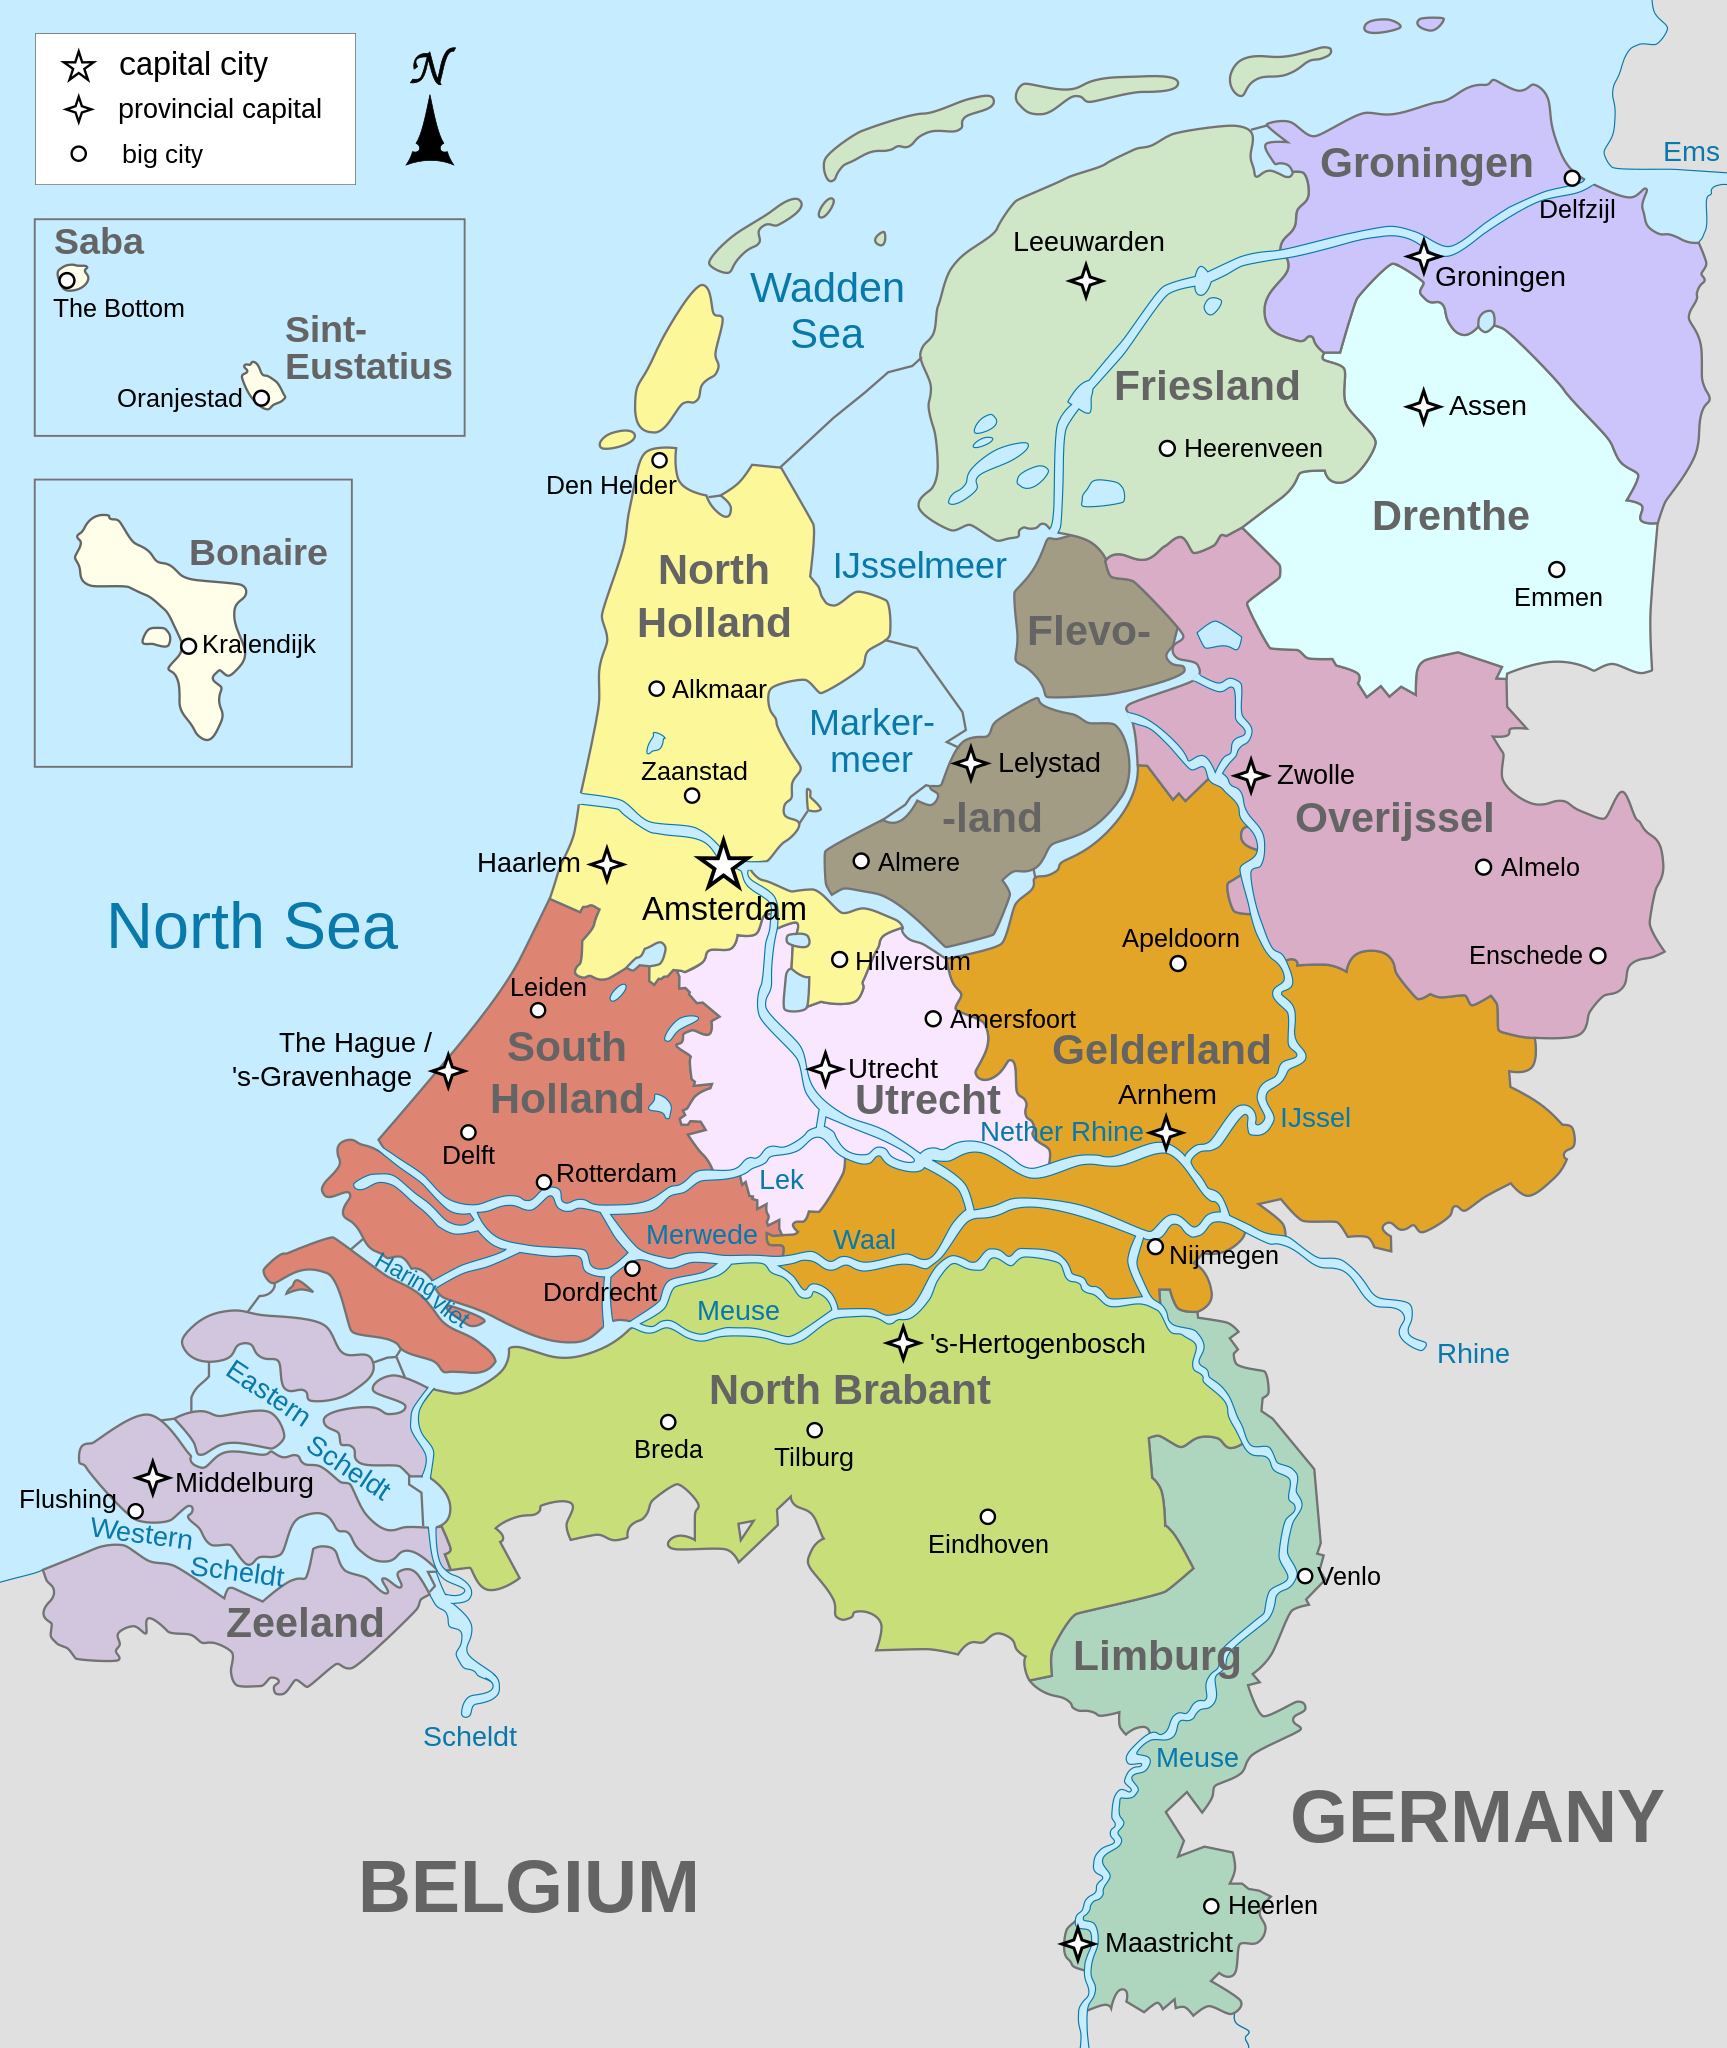 Location of Kingdom of the Netherlands